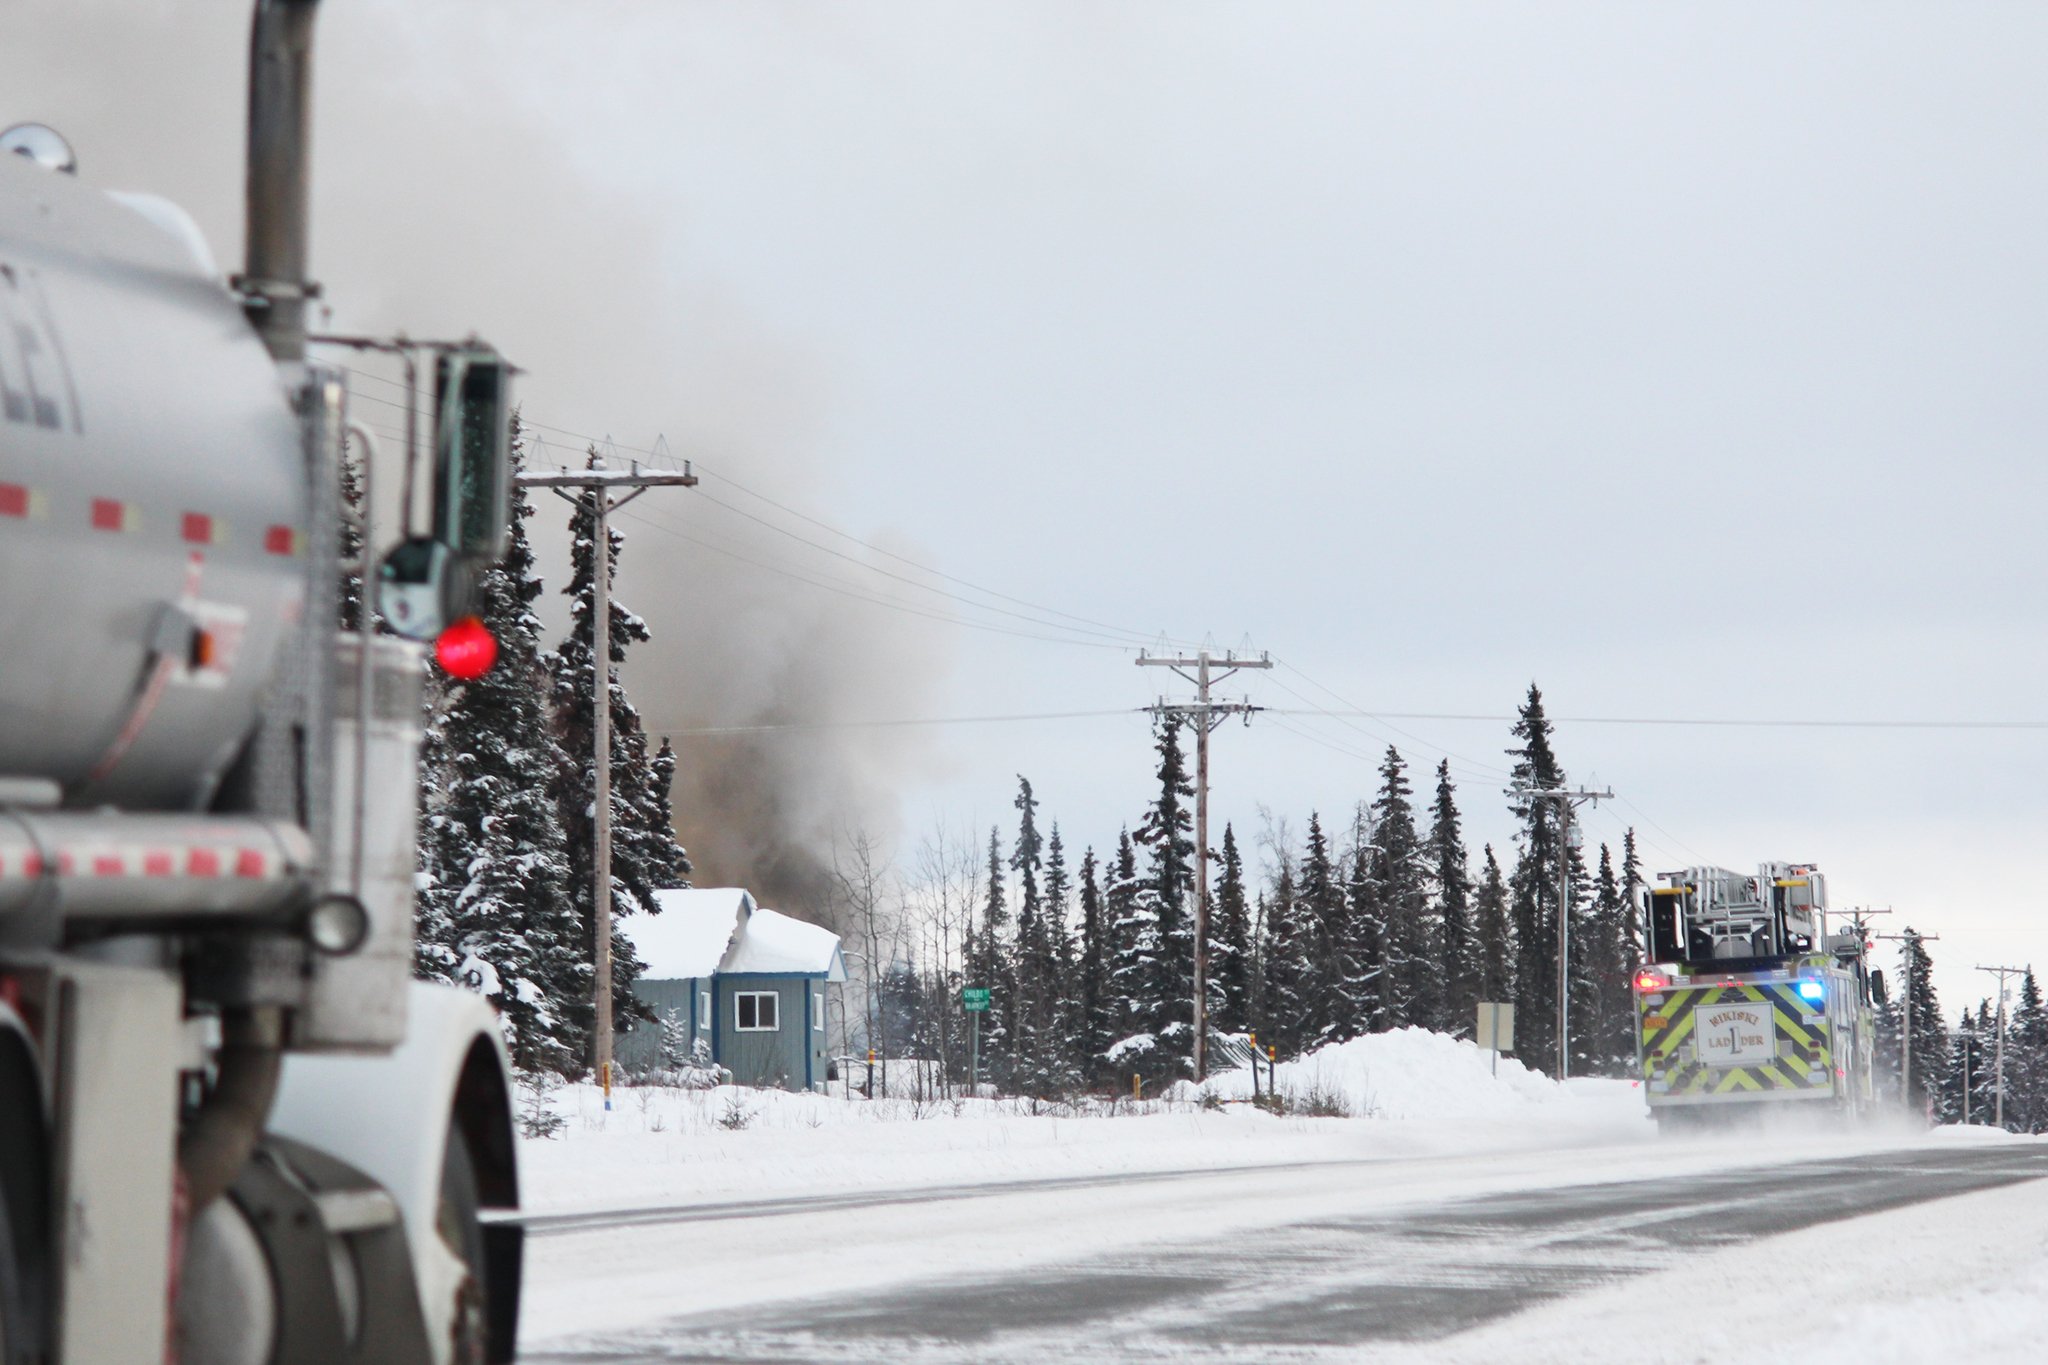 A Nikiski Fire Department engine arrives on the scene of a structure fire on Bridge Access Road on Wednesday, Feb. 22, 2017 in Kenai, Alaska. (Megan Pacer/Peninsula Clarion)